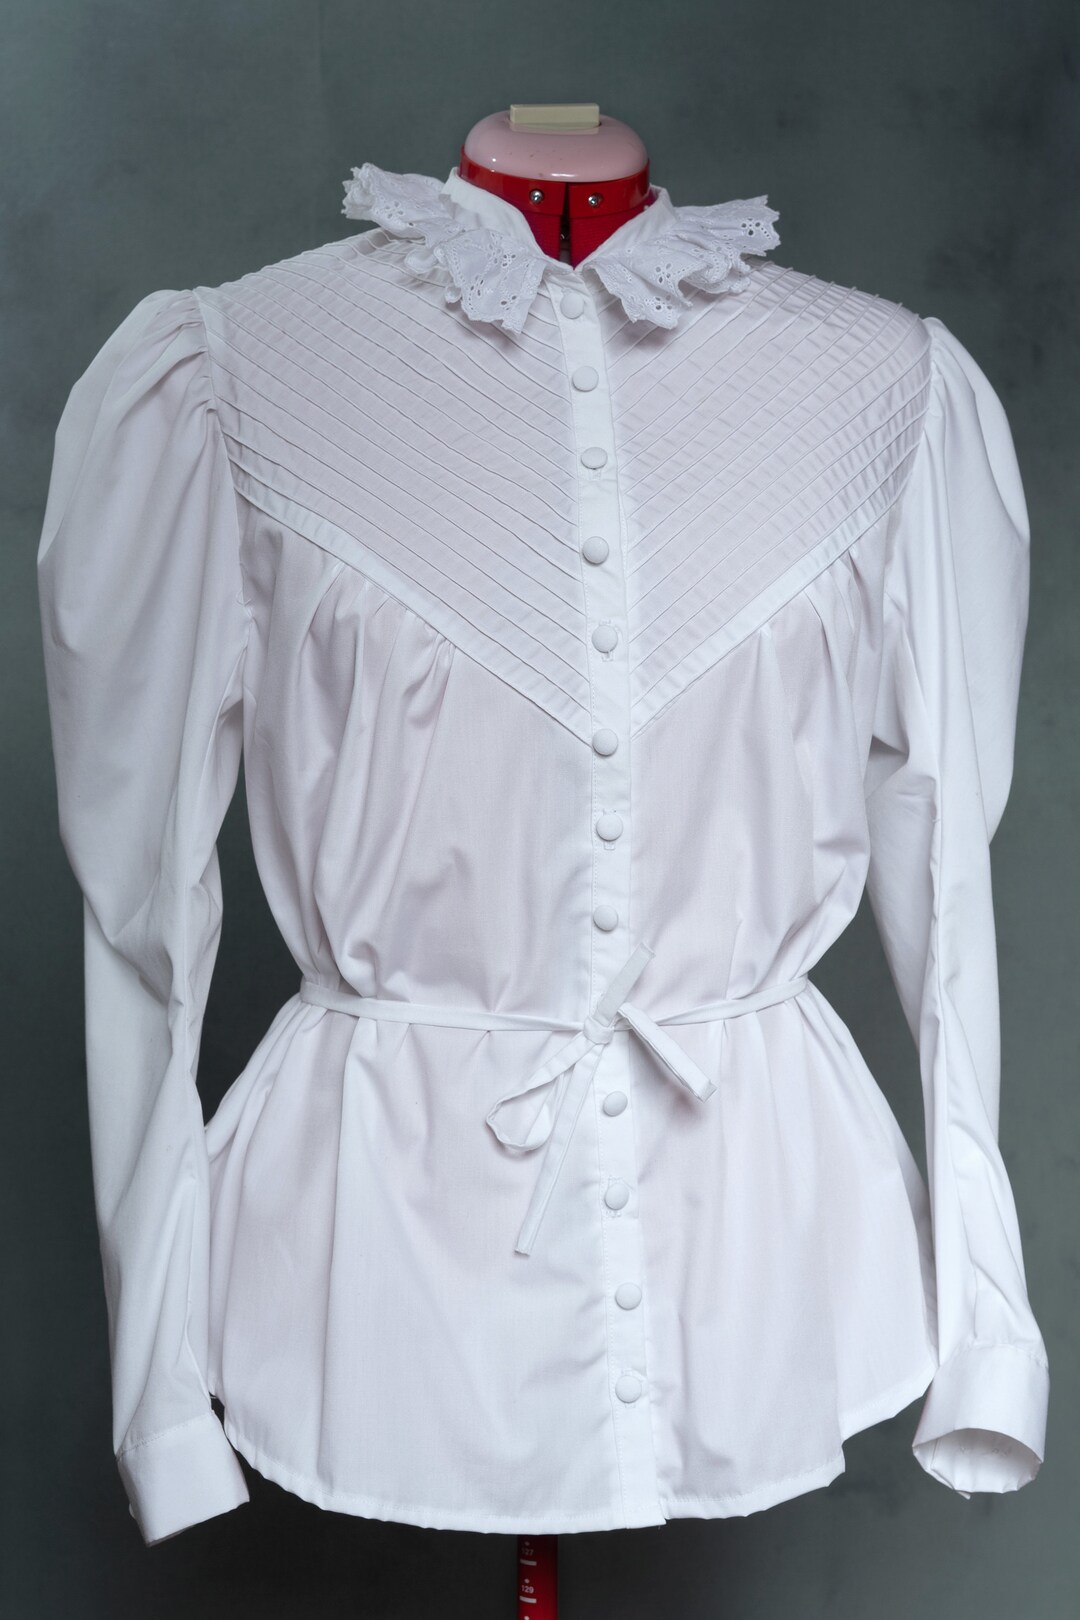 Suffragette Style Blouse Fine Made to Order - Etsy